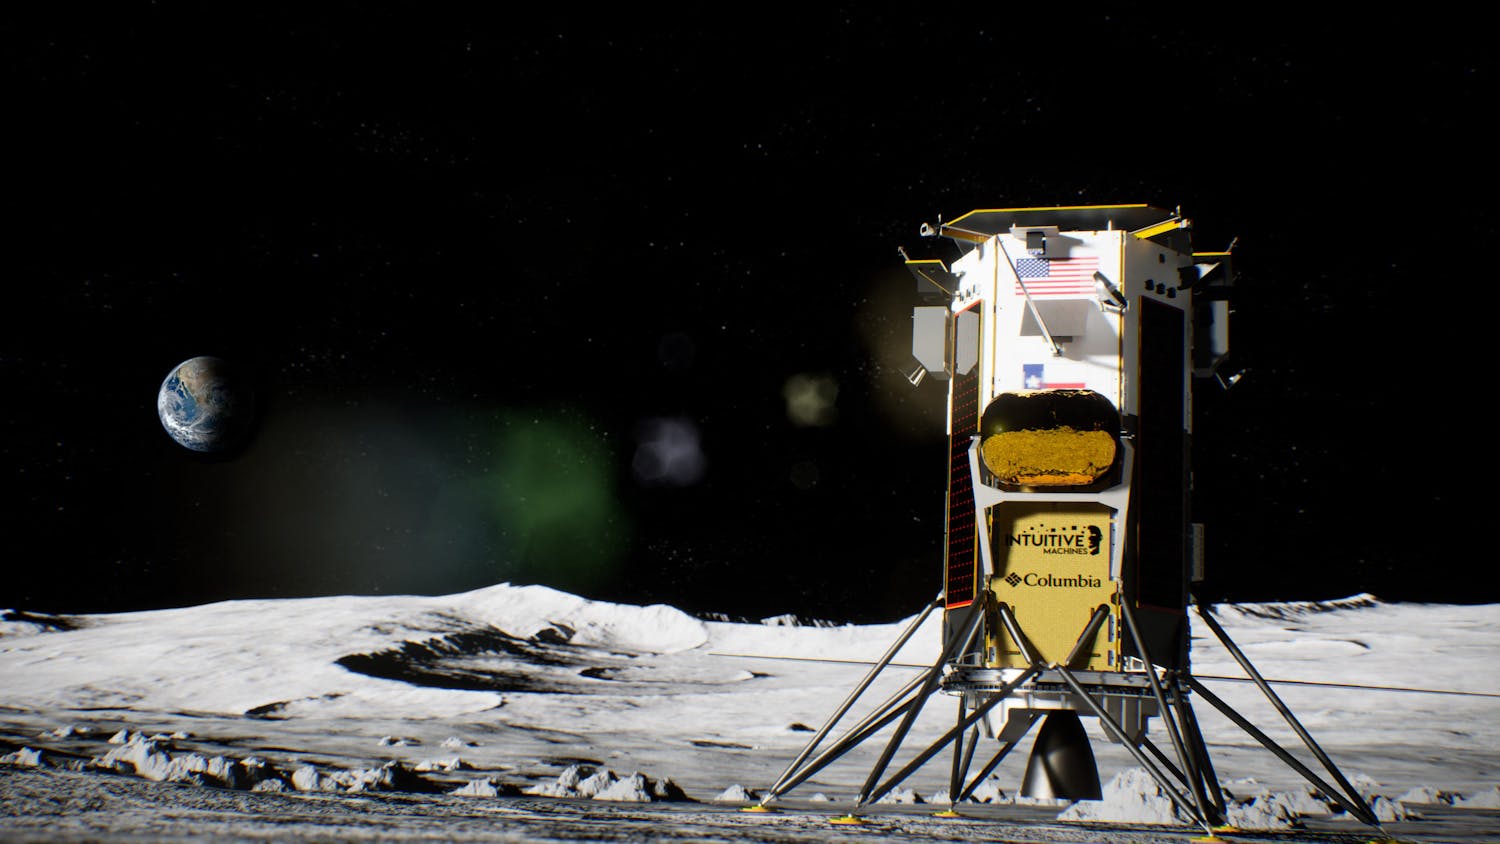 The first commercial lander to land safely on the moon